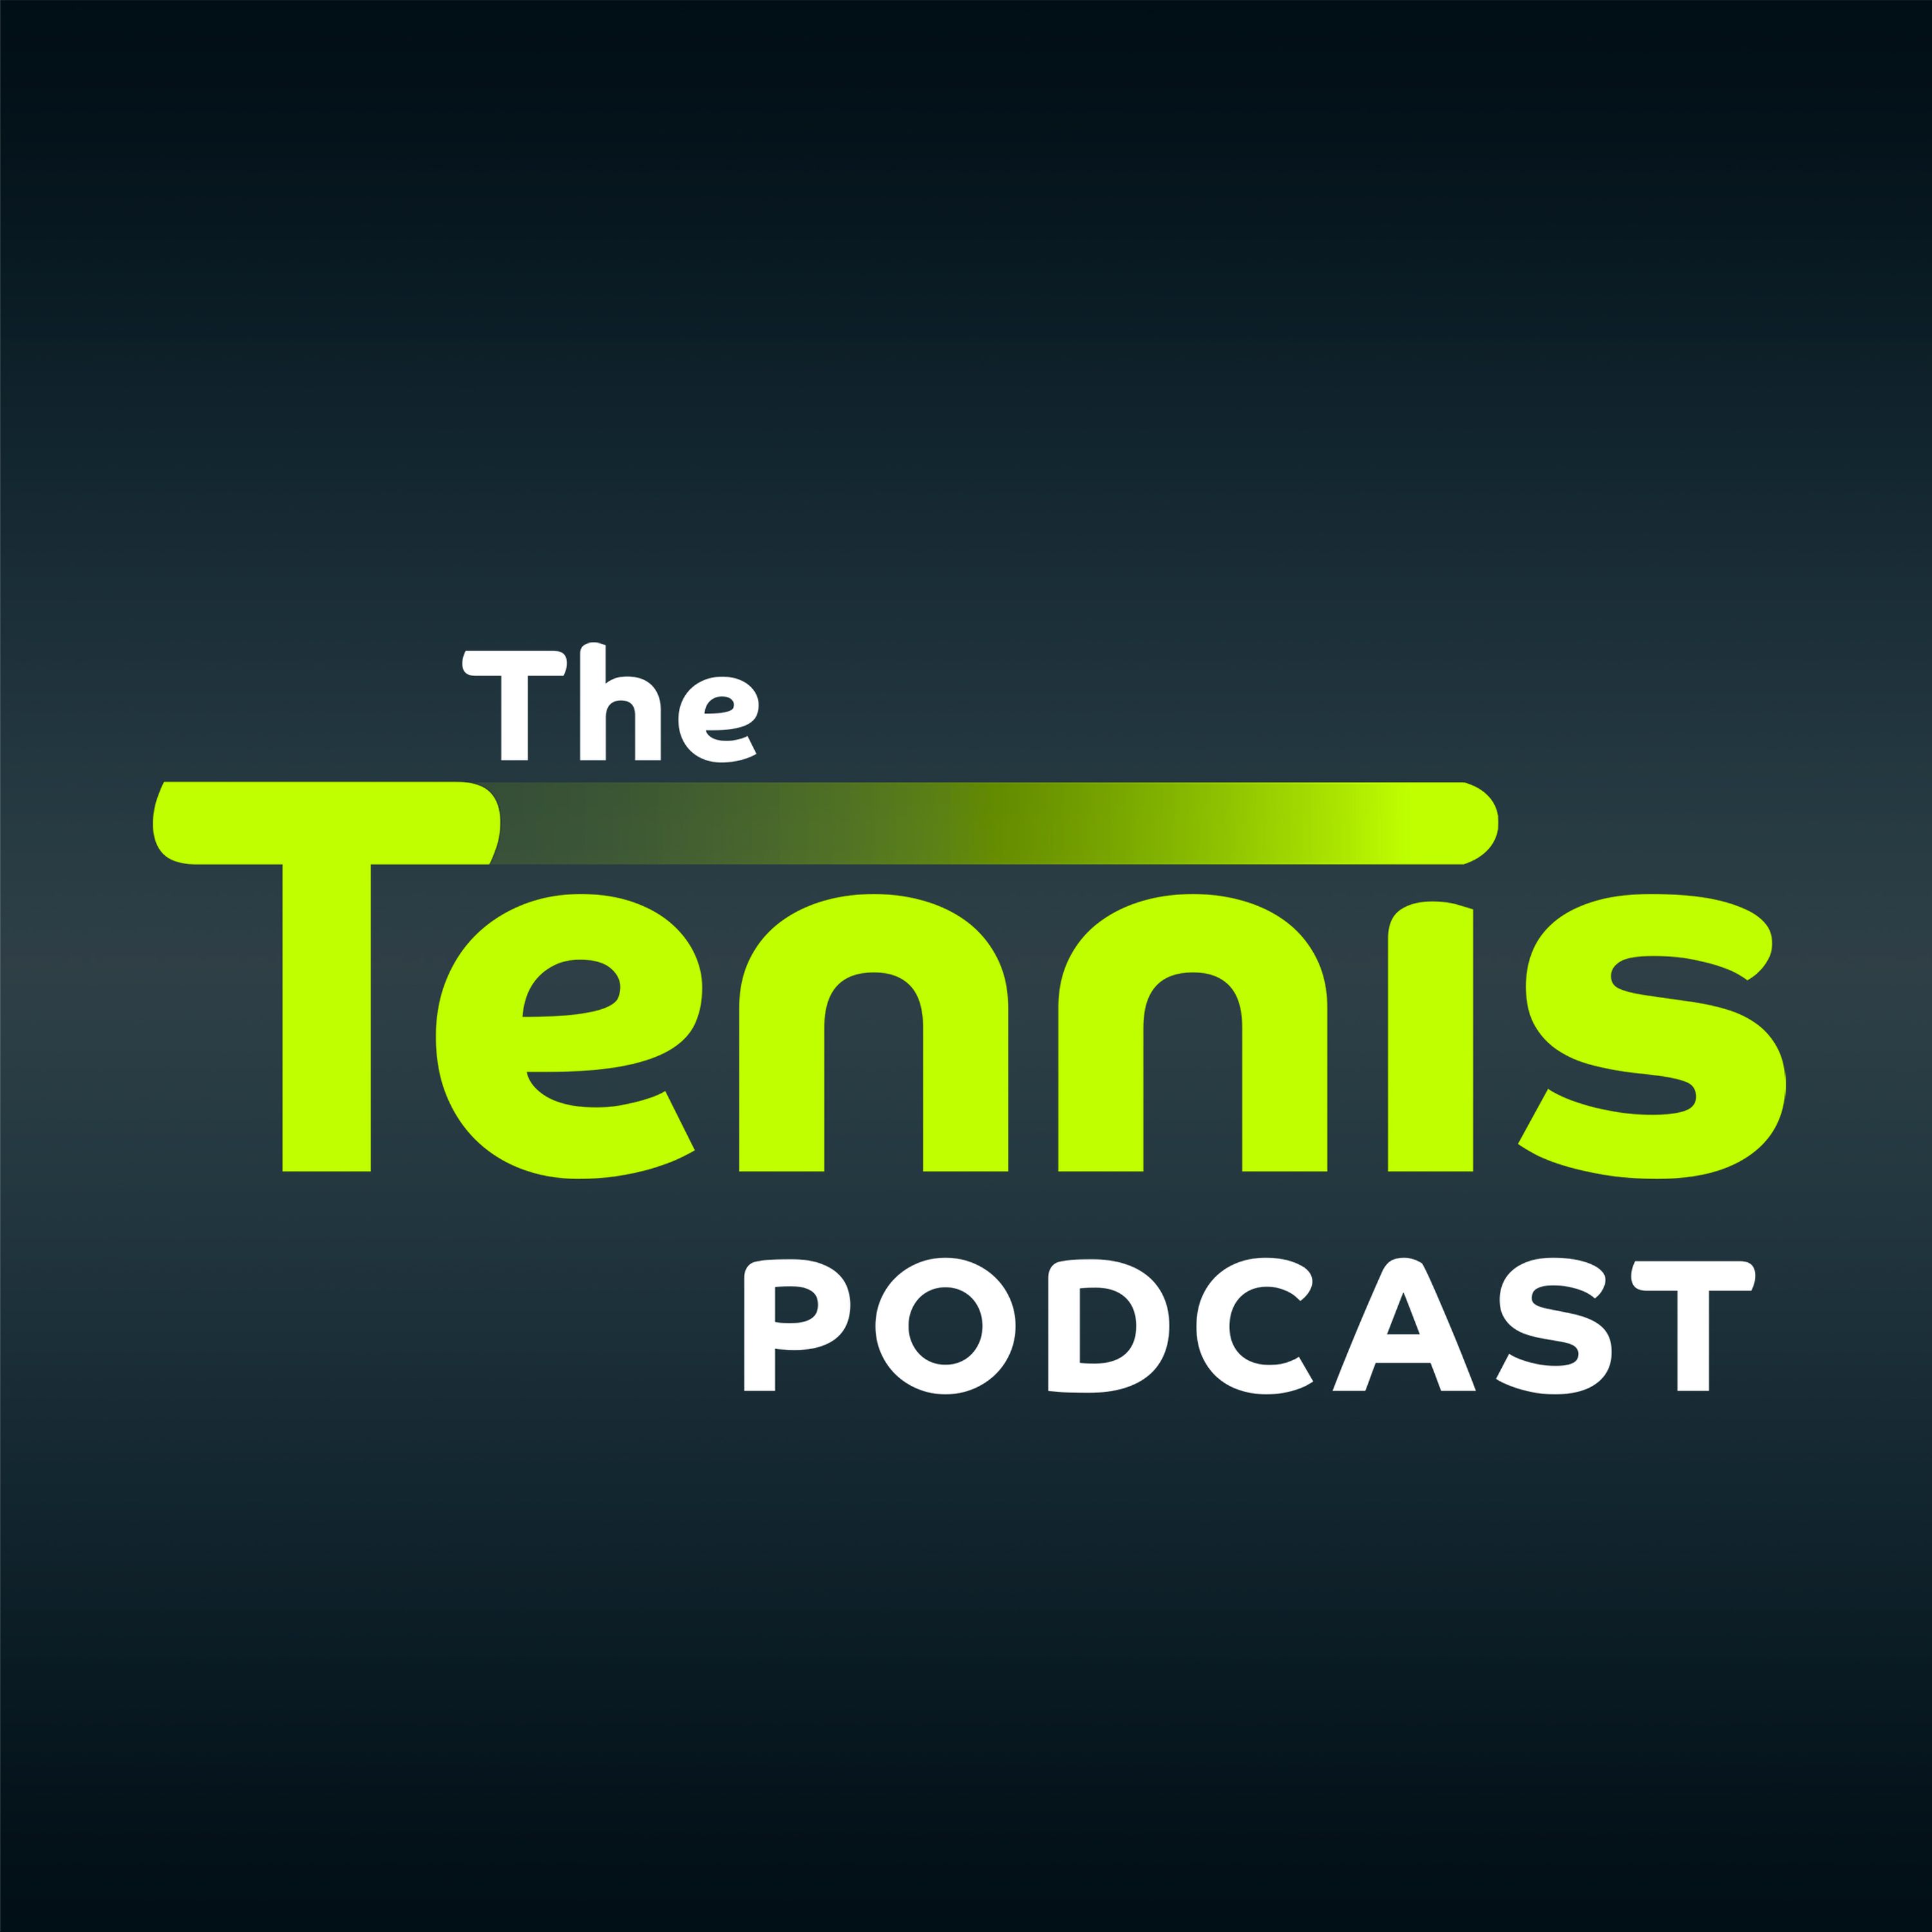 Roland Garros Day 9 - Powerplays, rematches and whisky